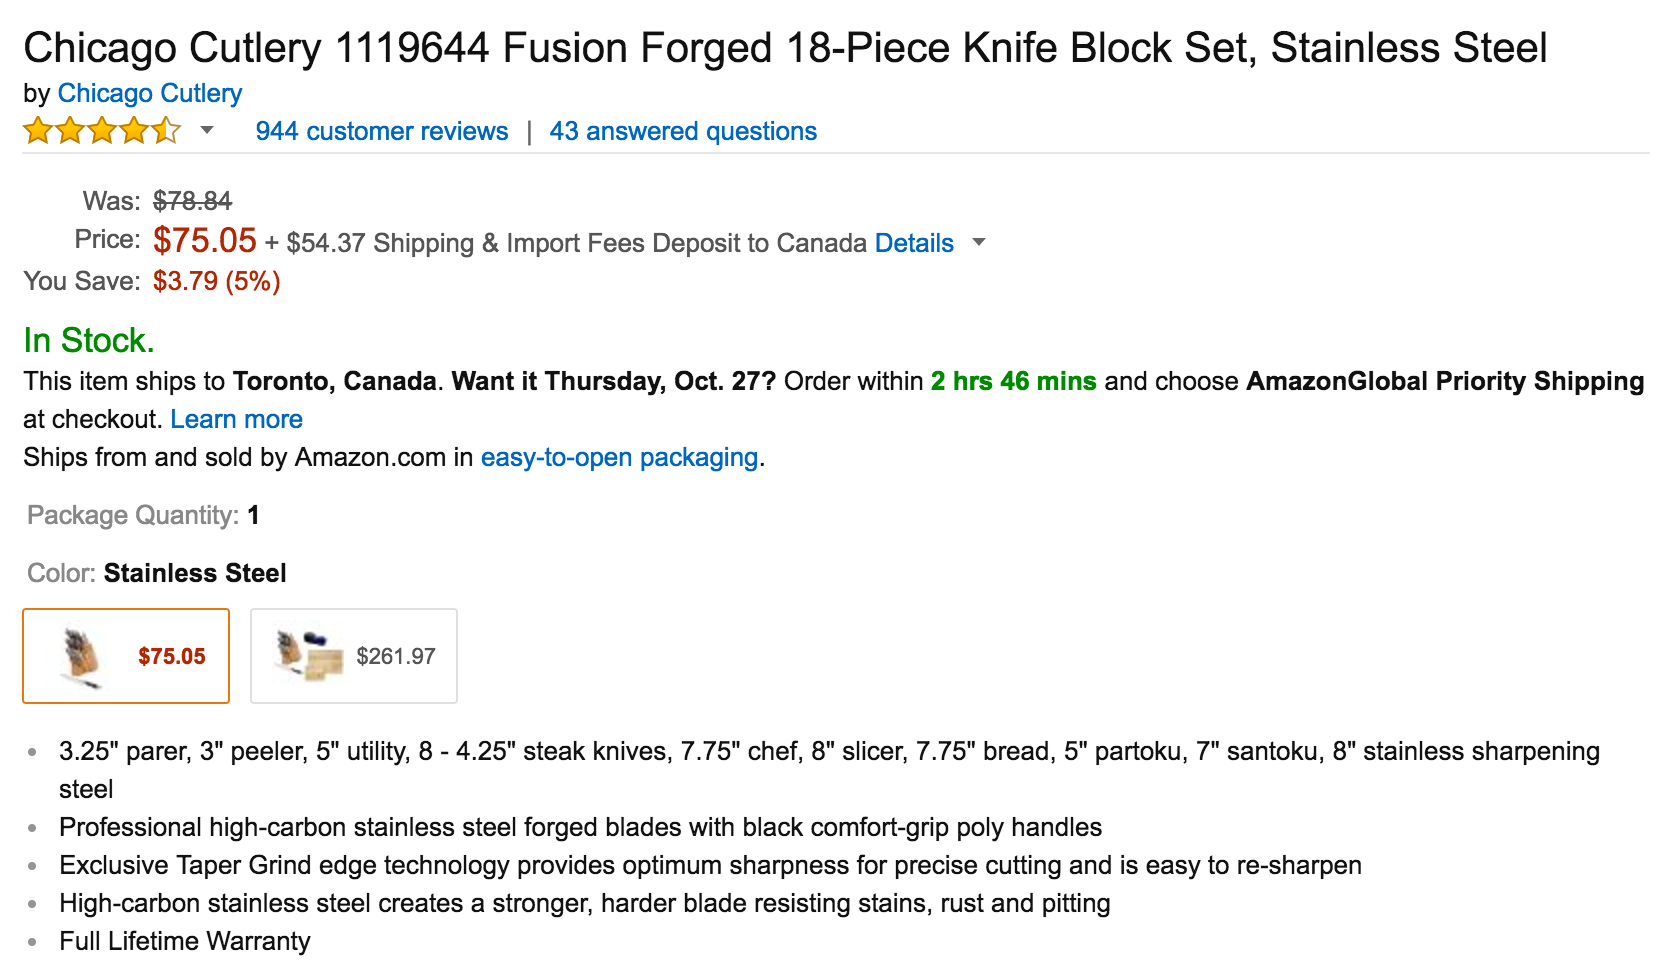 stainless-steel-chicago-cutlery-fusion-forged-18-piece-knife-block-set-1119644-sale-03